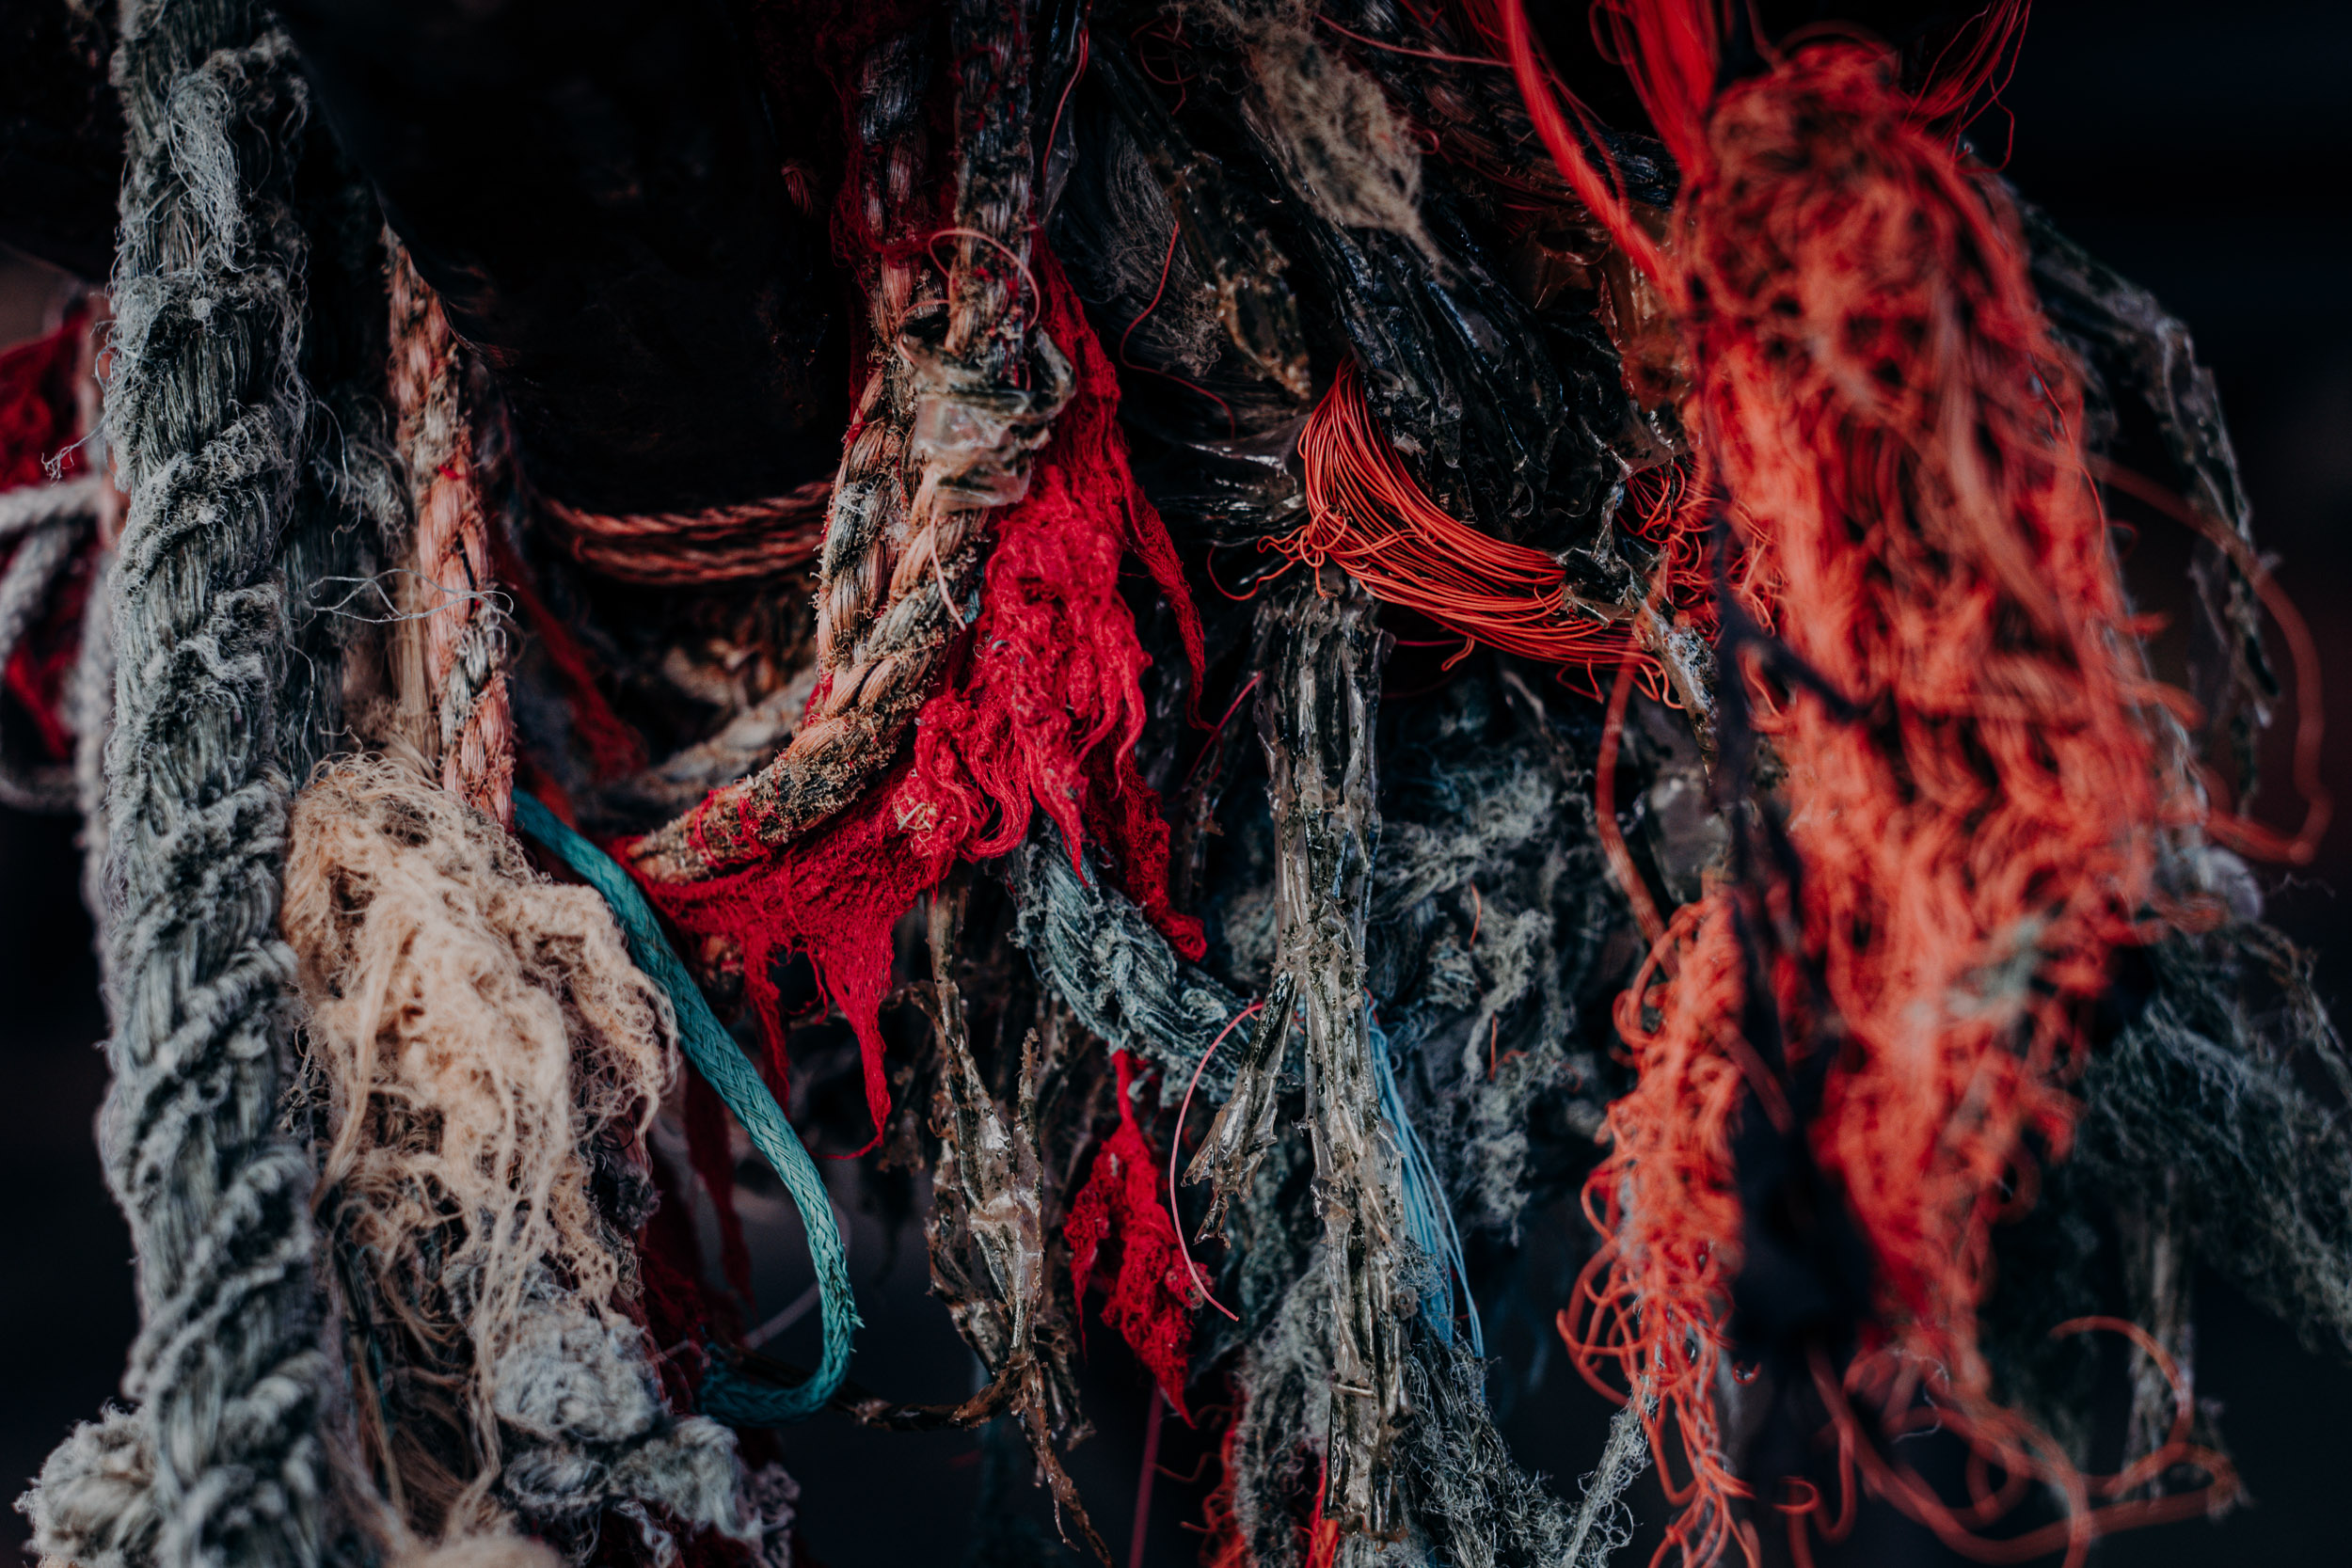 Bright red and orange rope and fishing gut abandoned by fishermen and left to pollute our oceans. 